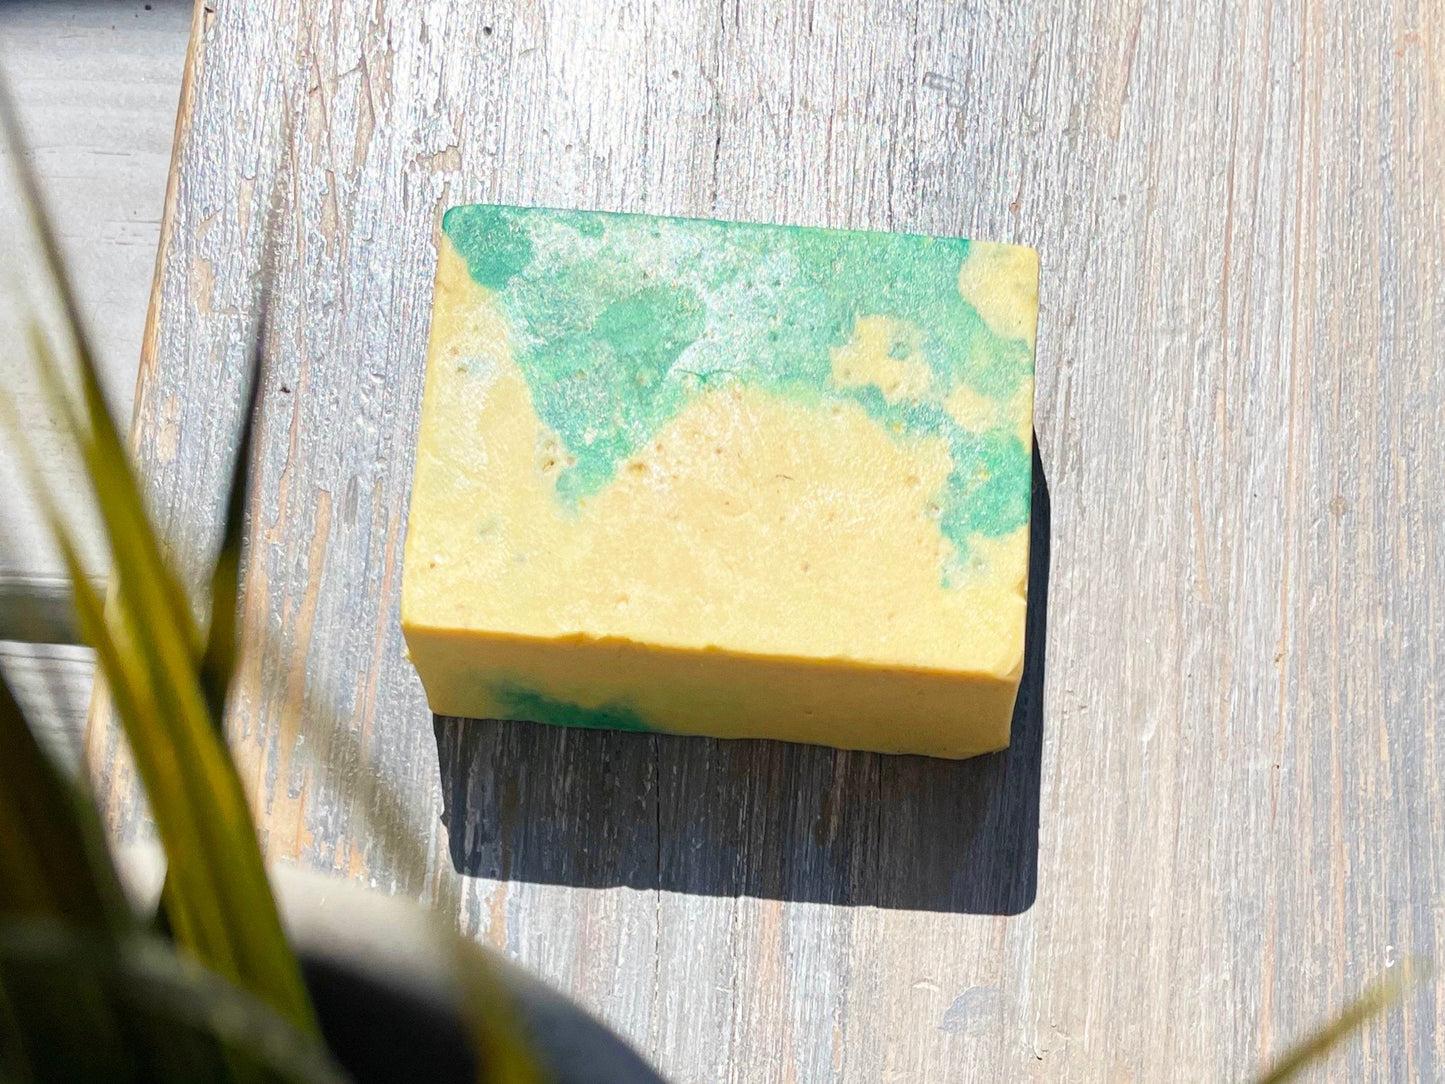 Yellow and green soap with exfoliating apricot powder  handmade and home made vegan soap bar with no palm oil